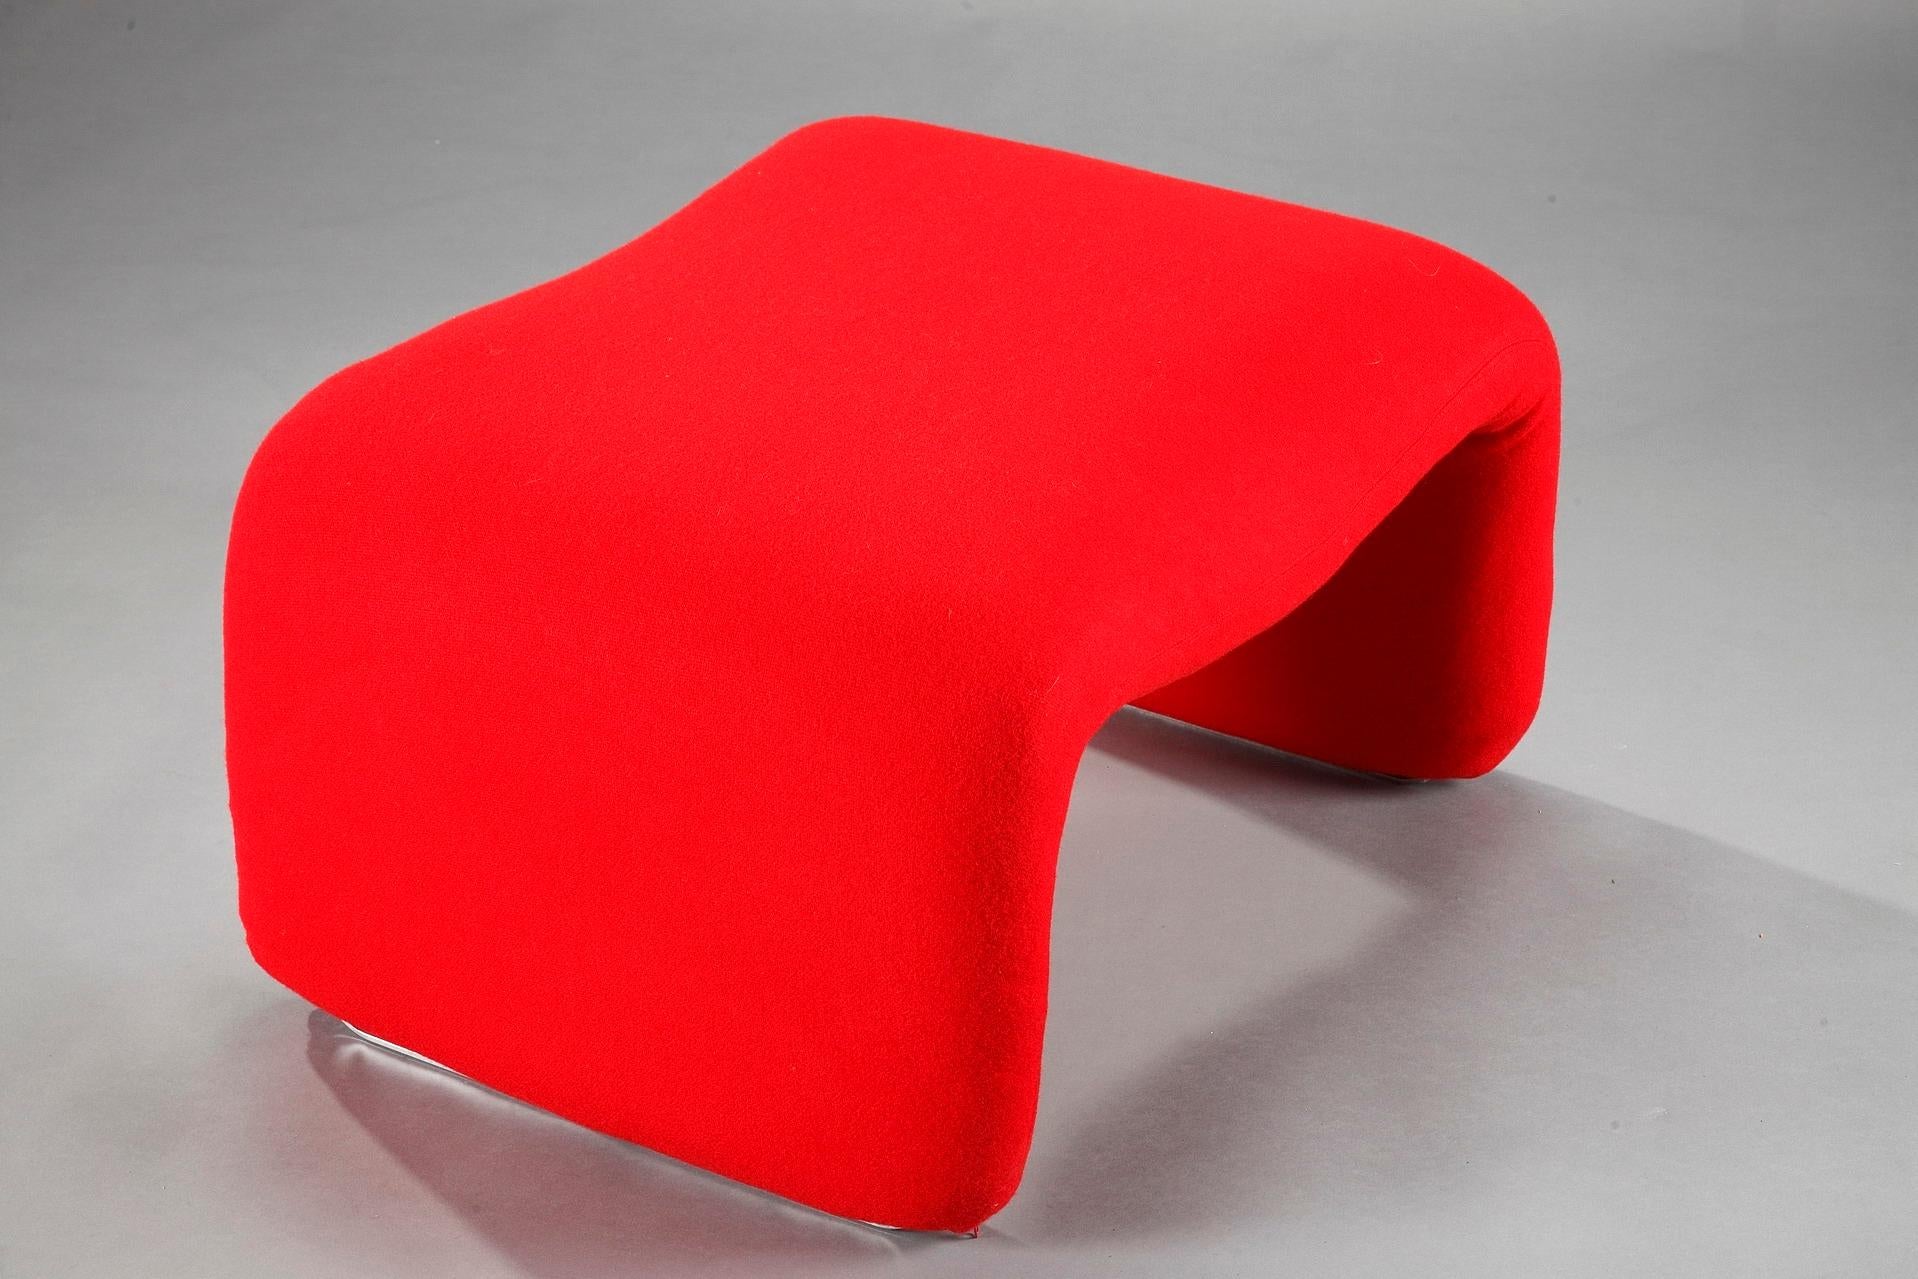 1960s Djinn ottoman by Olivier Mourgue for Airborne. Kvadrat red upholstery over foam and internal steel frame. This ottoman is very popular because was featured in Stanley Kubrick’s movie 2001: A Space Odyssey. A red Djinn chair and sofa are